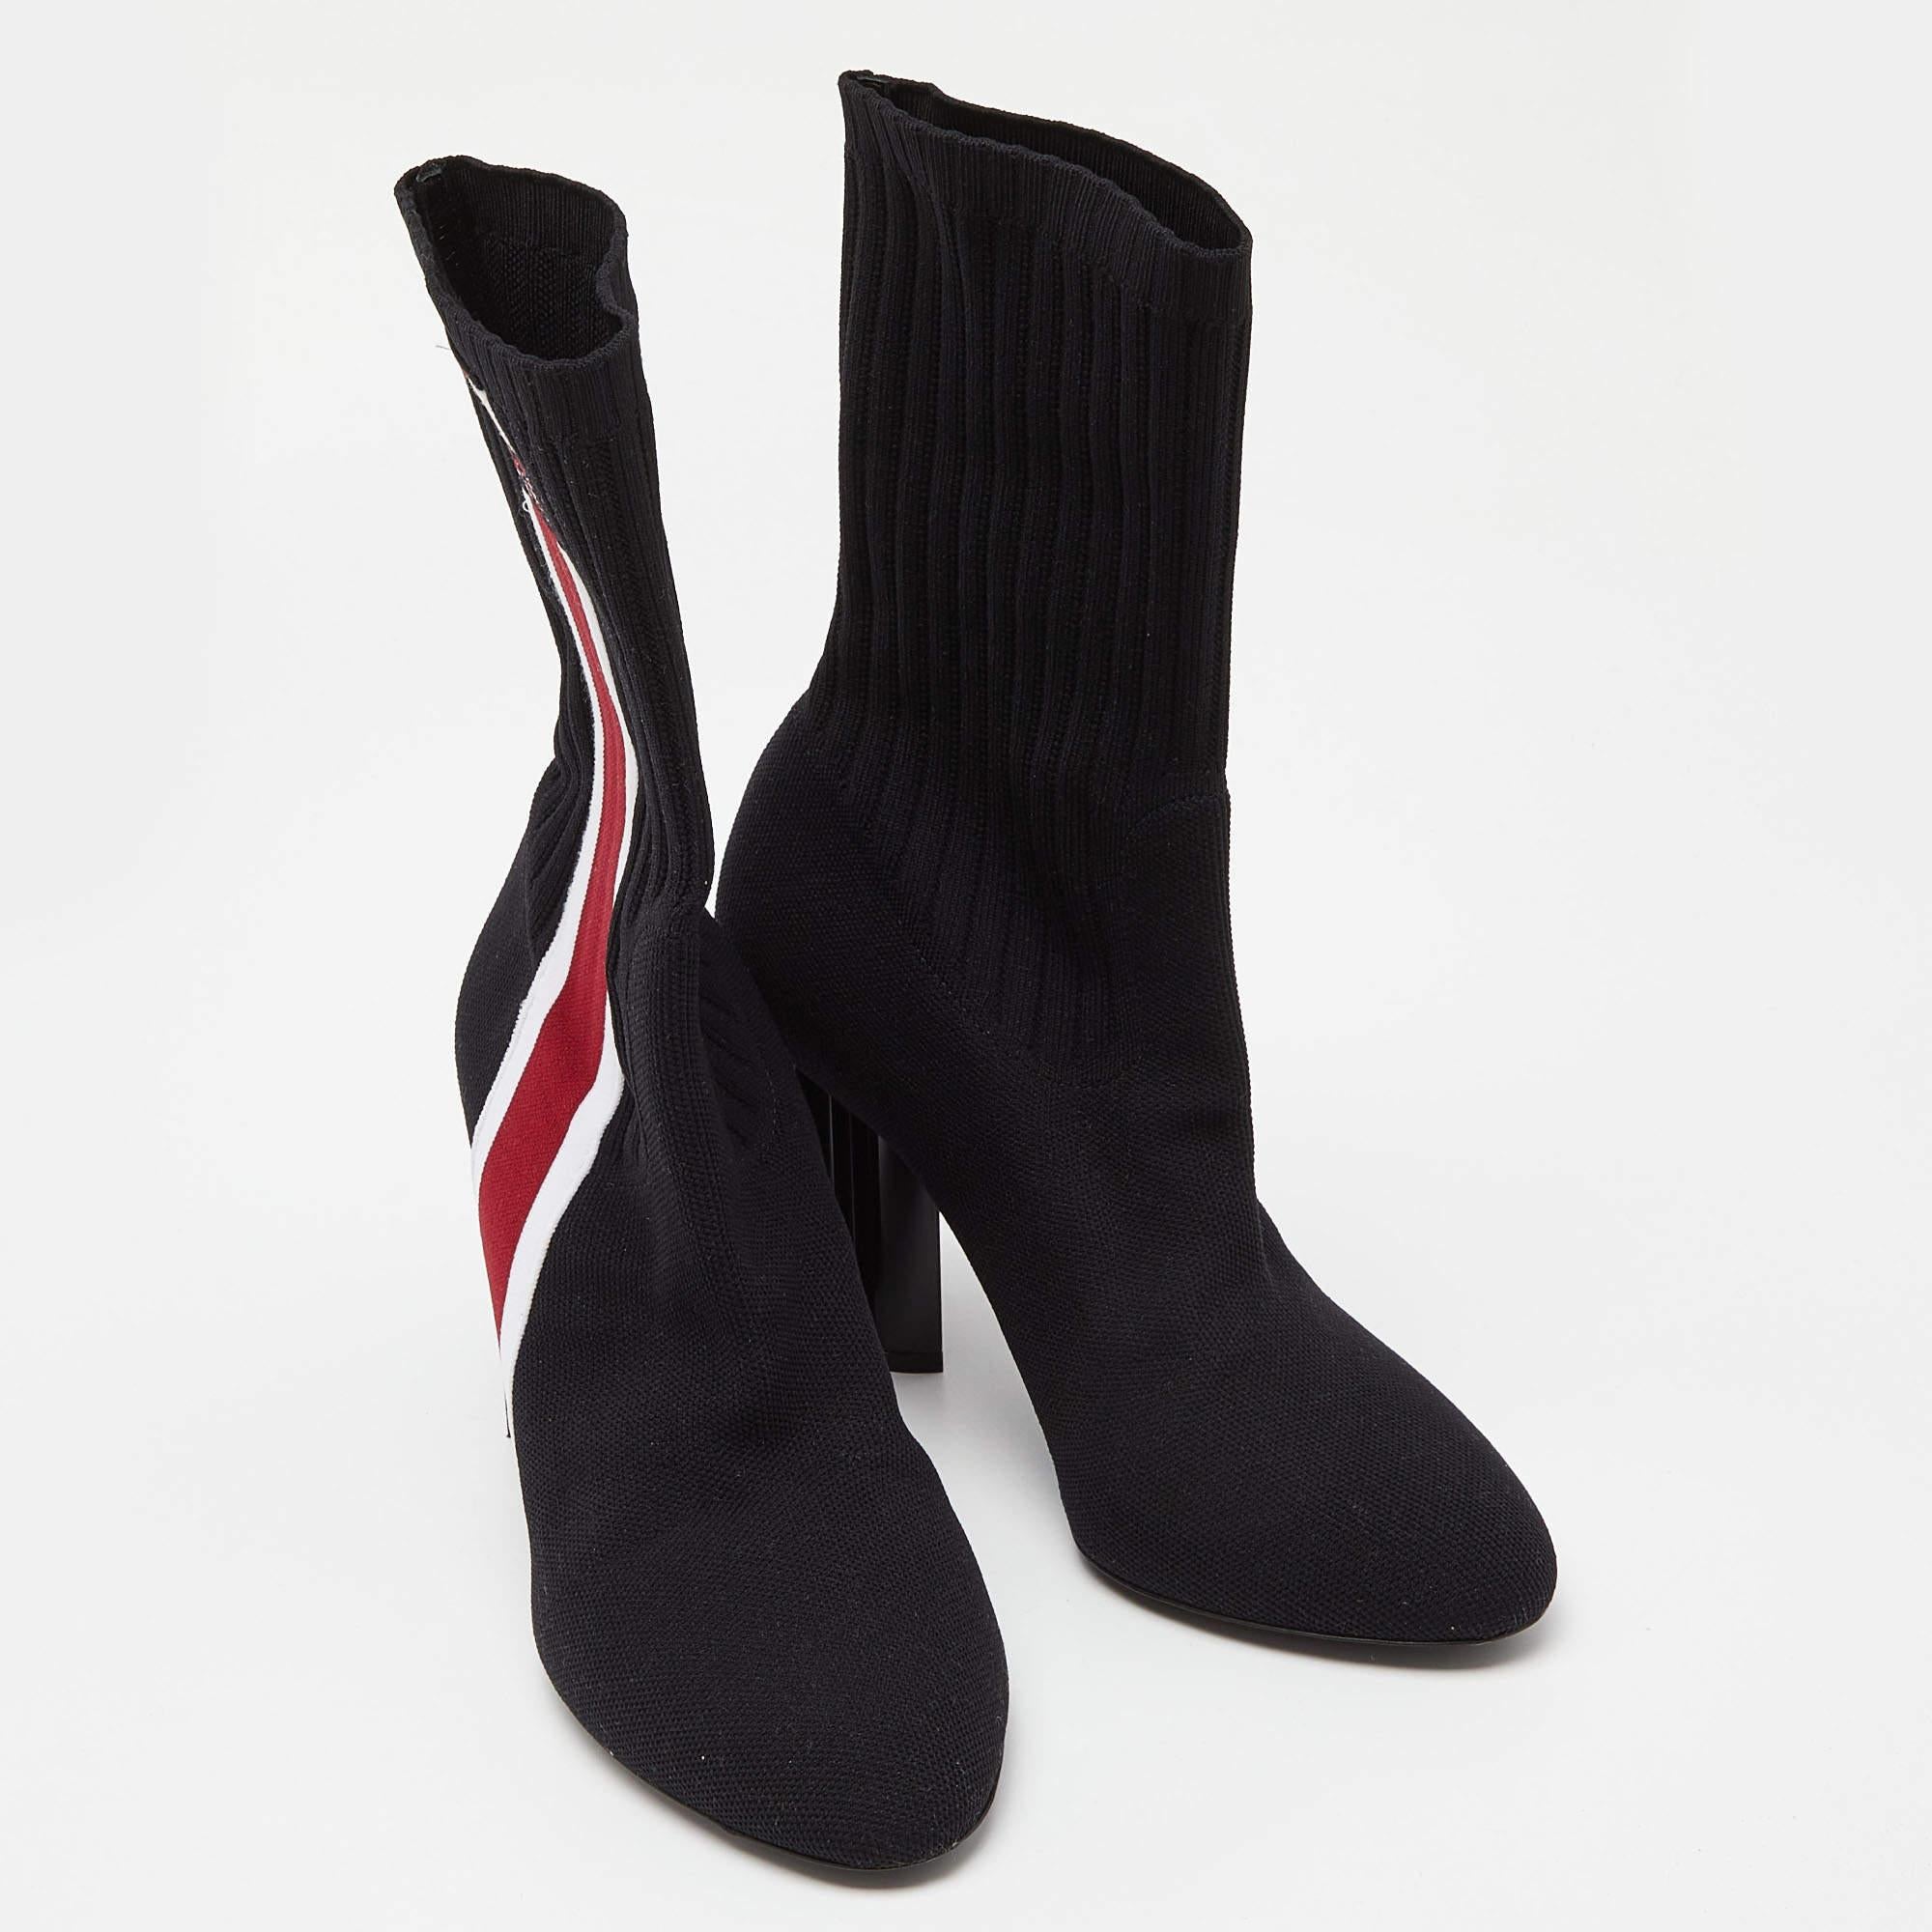 Crafted from knit fabric in a sock design, these Louis Vuitton black boots will help you make a memorable fashion statement. They come with covered toes and heels that are carved as a Monogram flower. The ankle-length boots are finished with